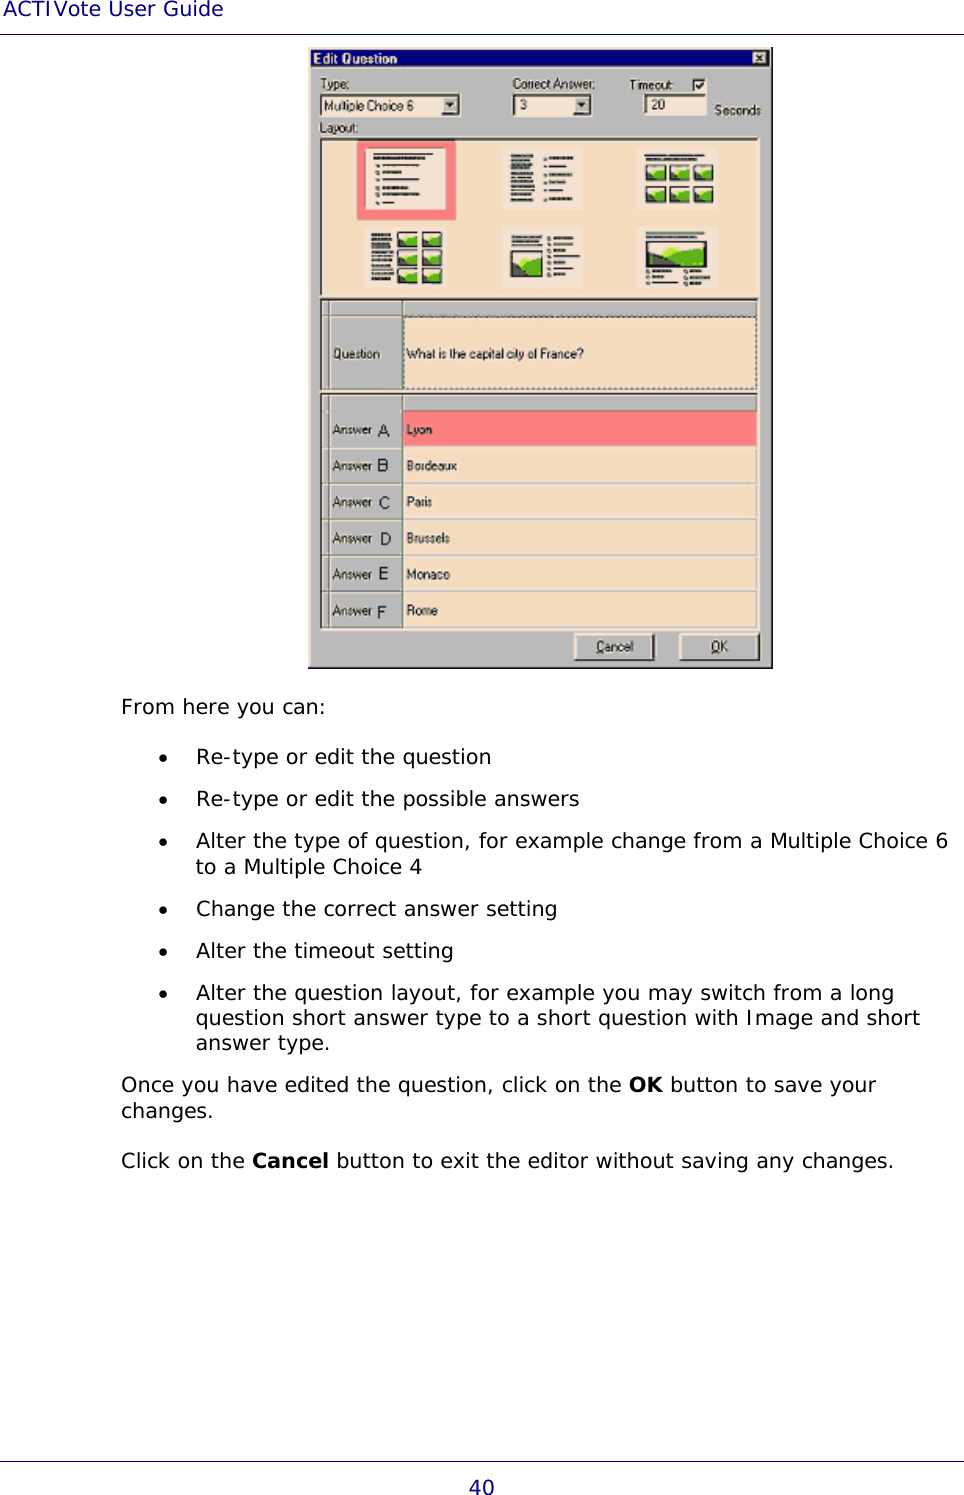 ACTIVote User Guide 40  From here you can: • Re-type or edit the question • Re-type or edit the possible answers • Alter the type of question, for example change from a Multiple Choice 6 to a Multiple Choice 4 • Change the correct answer setting • Alter the timeout setting • Alter the question layout, for example you may switch from a long question short answer type to a short question with Image and short answer type. Once you have edited the question, click on the OK button to save your changes. Click on the Cancel button to exit the editor without saving any changes.  